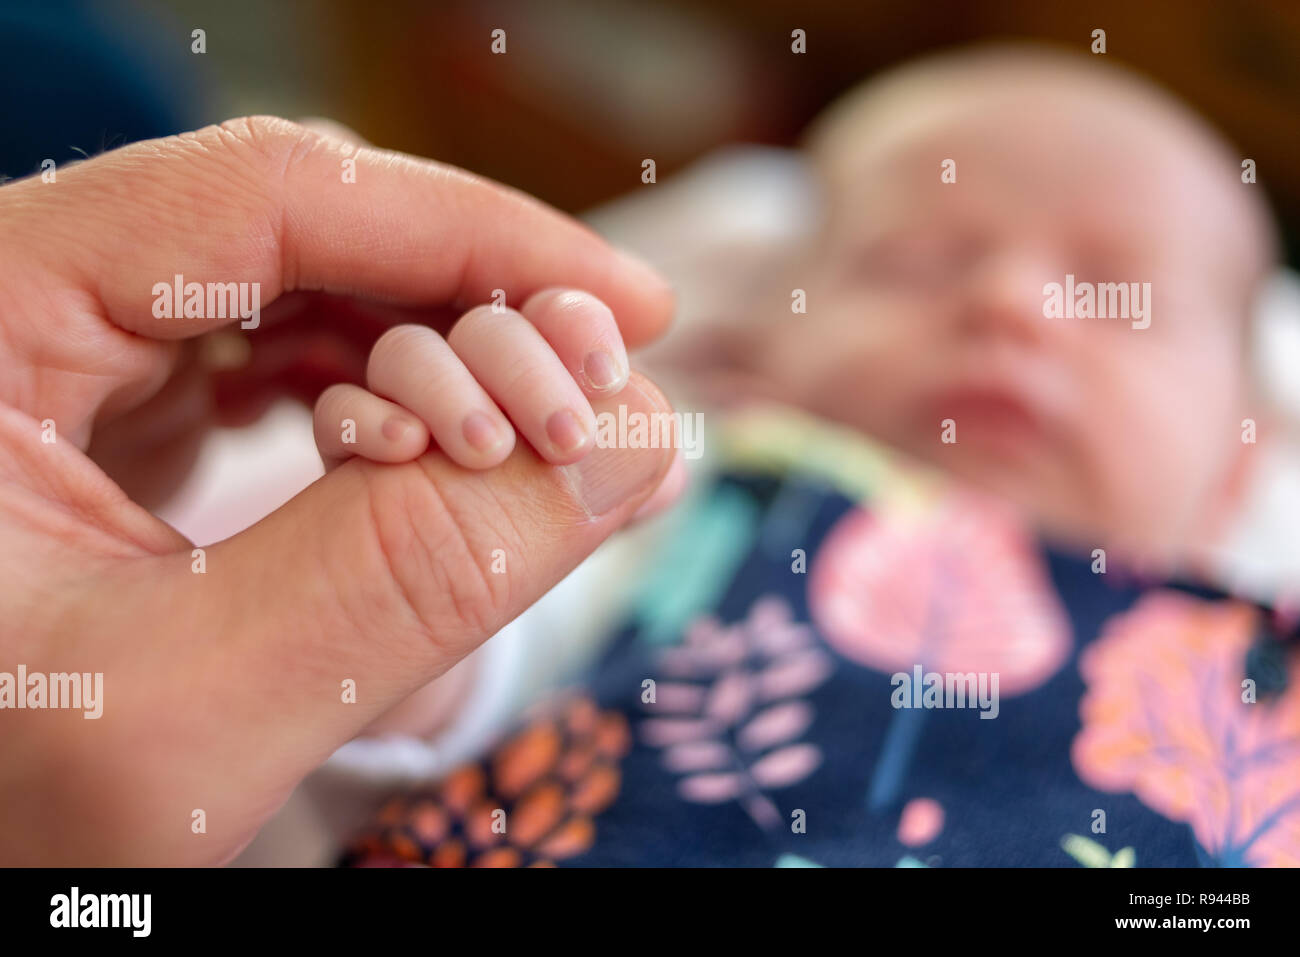 Hand and fingers of a new born baby wrapped around an adult thumb. Stock Photo